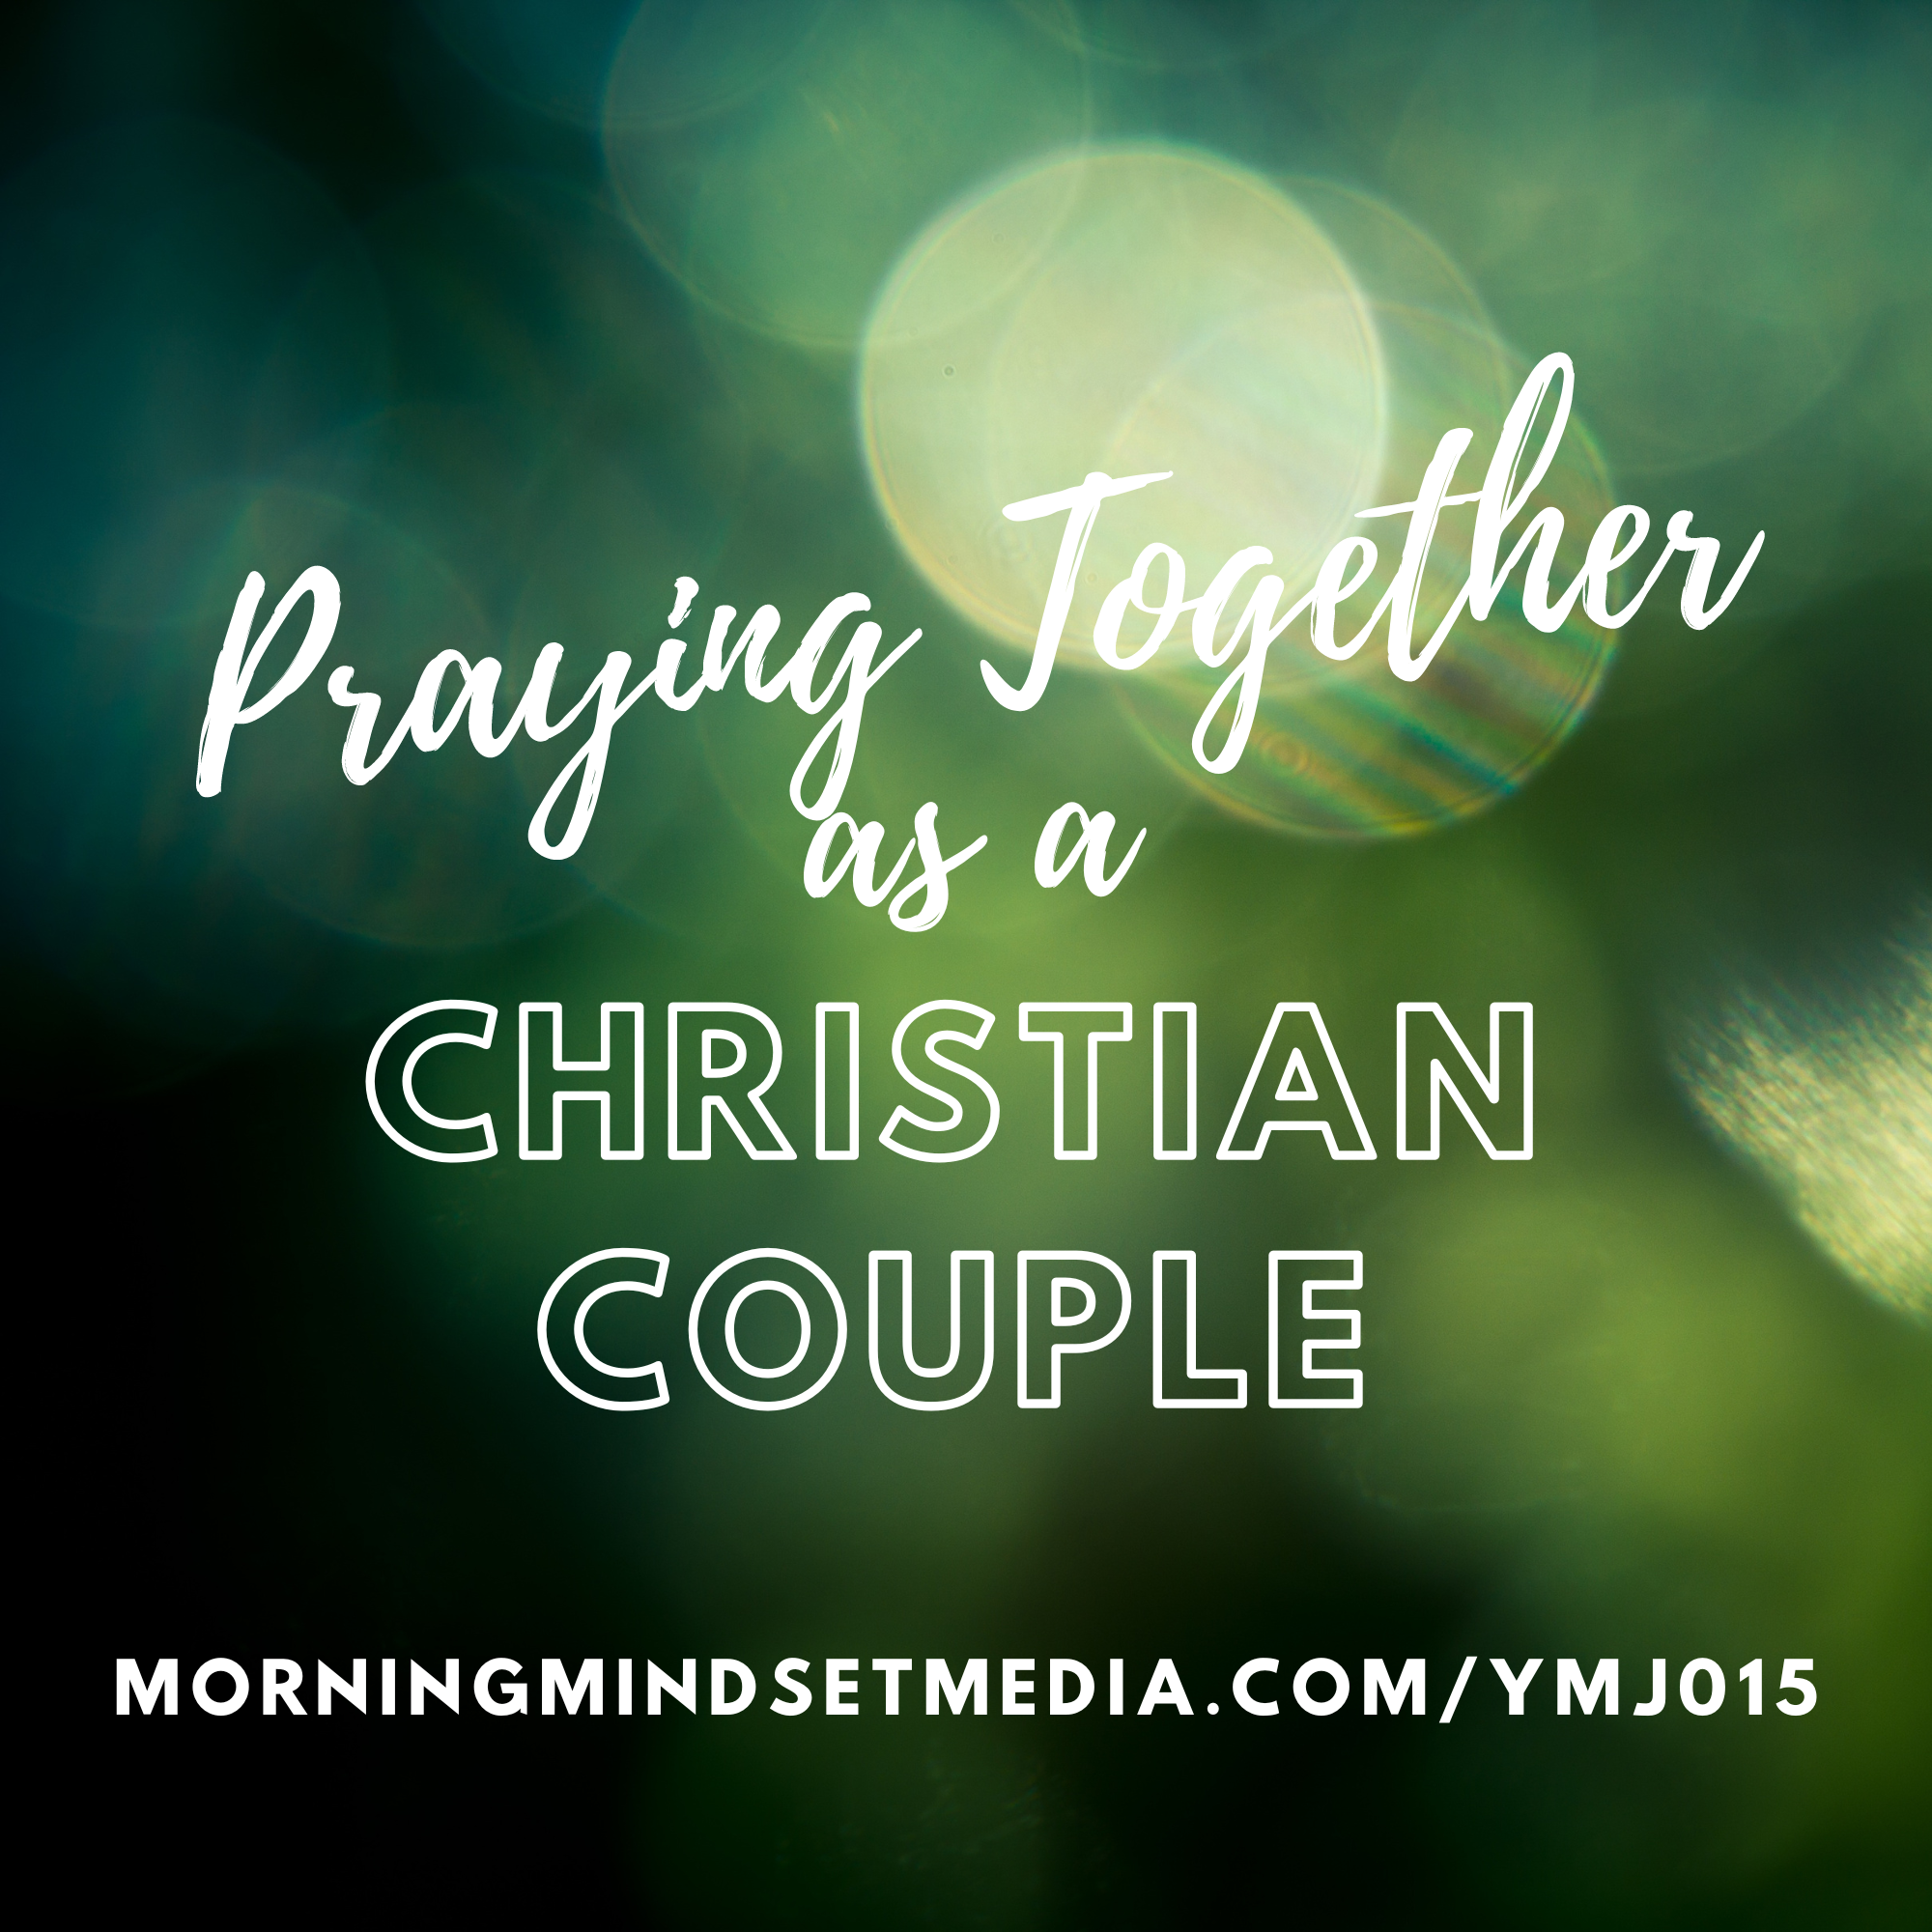 015 Praying Together as a Christian Couple